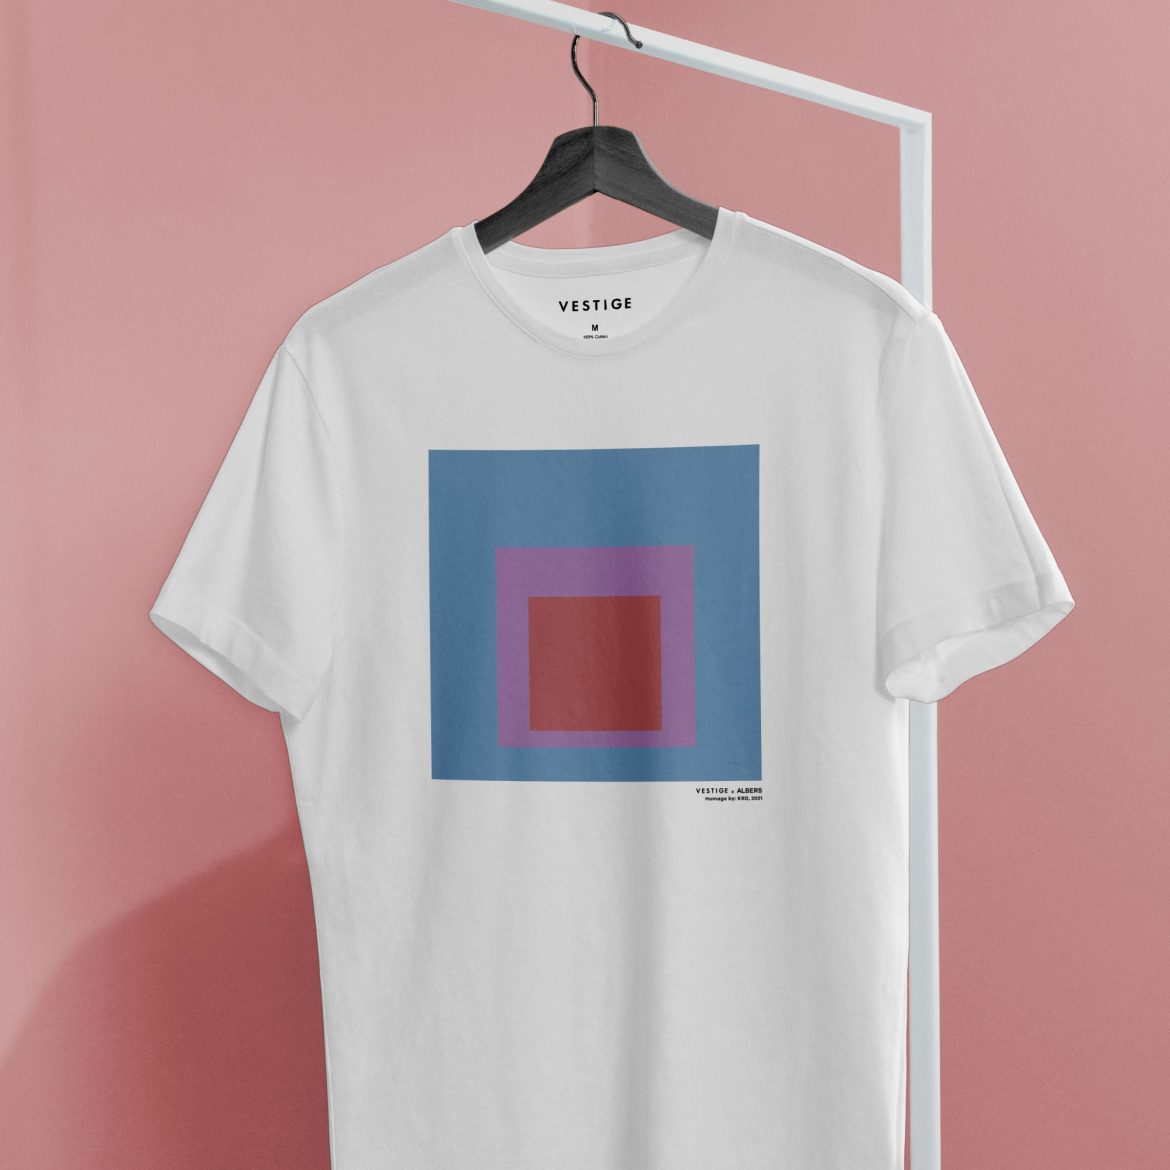 Vestige Graphic T-Shirts | The Coolector